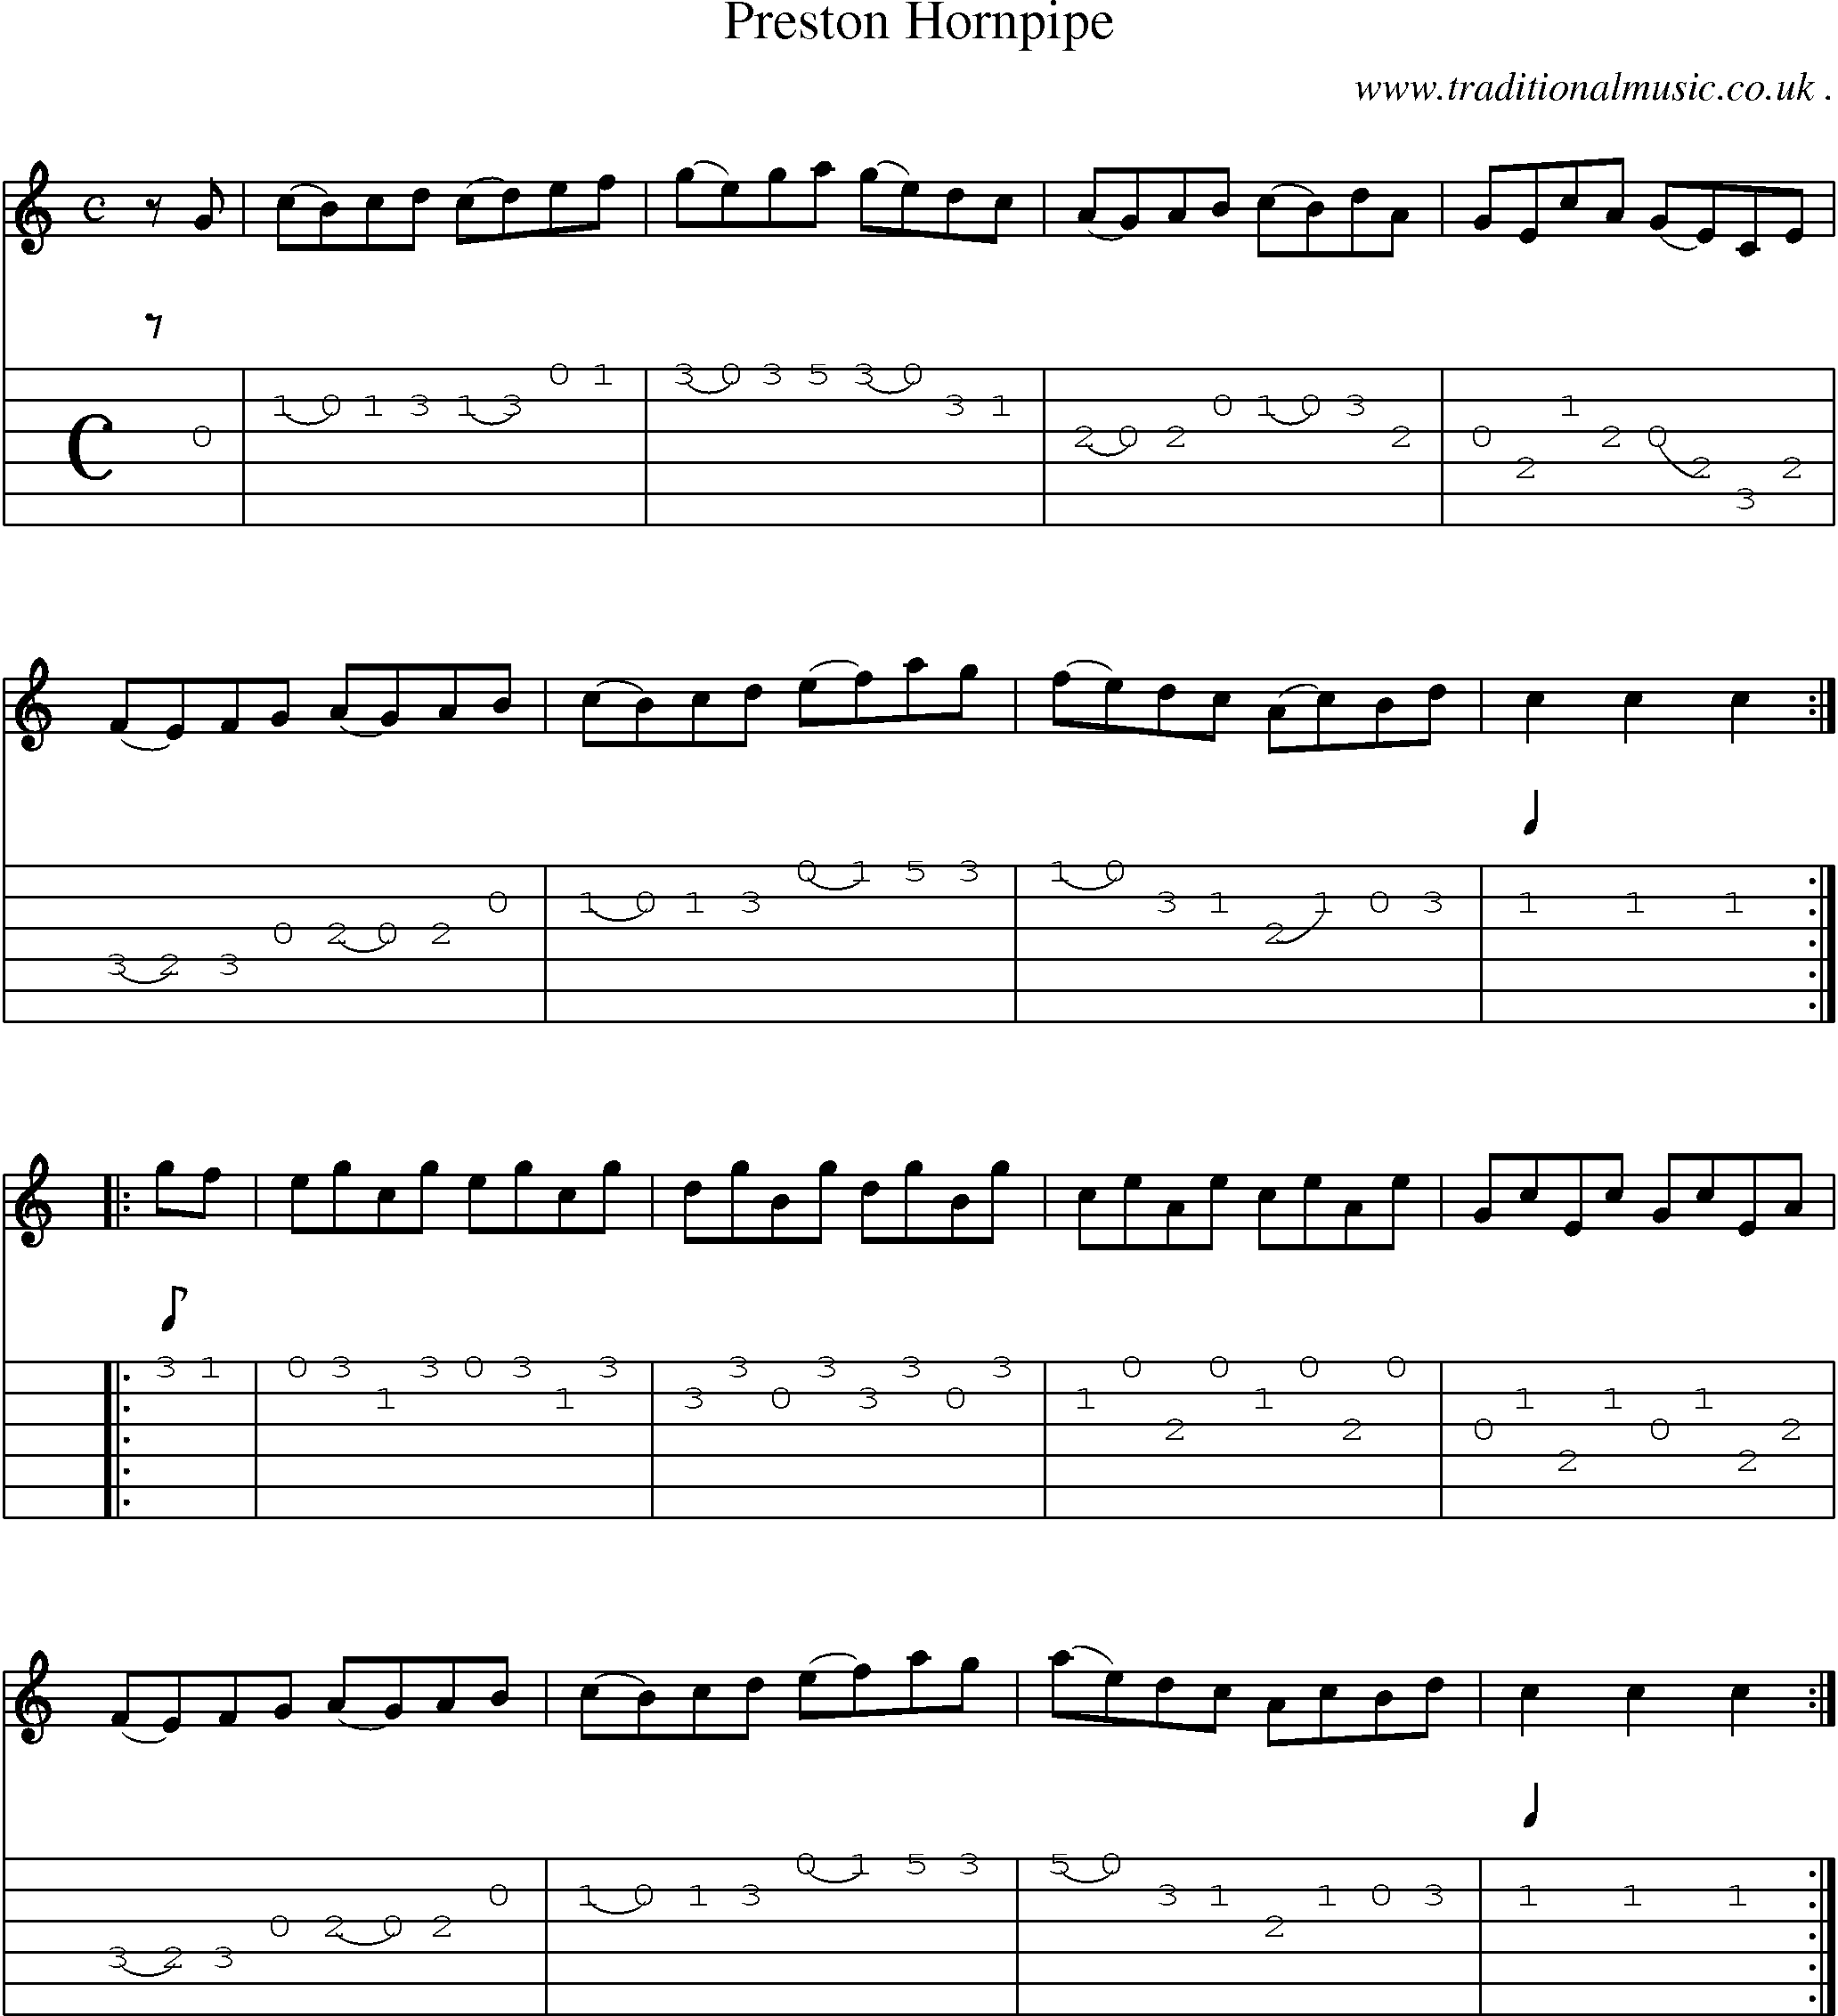 Sheet-Music and Guitar Tabs for Preston Hornpipe